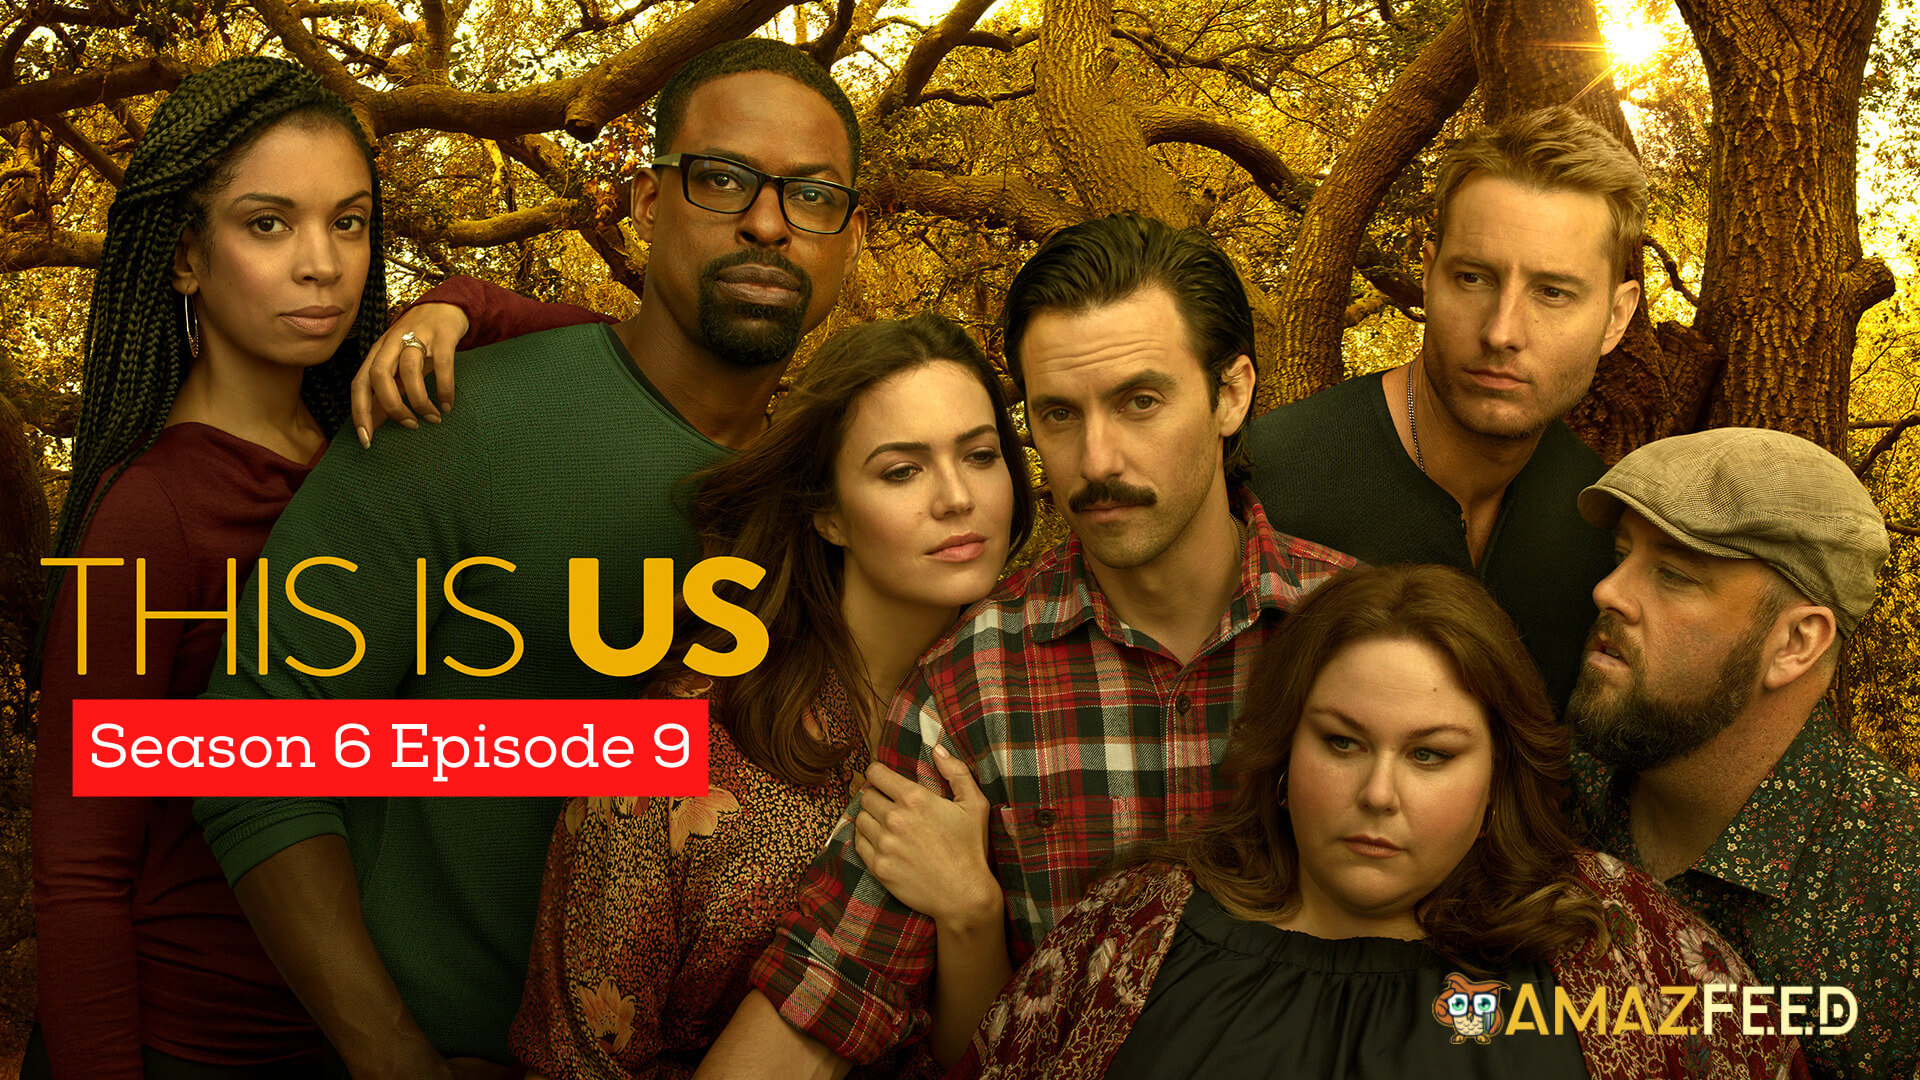 This Is Us Season 6 Episode 9 Release Date